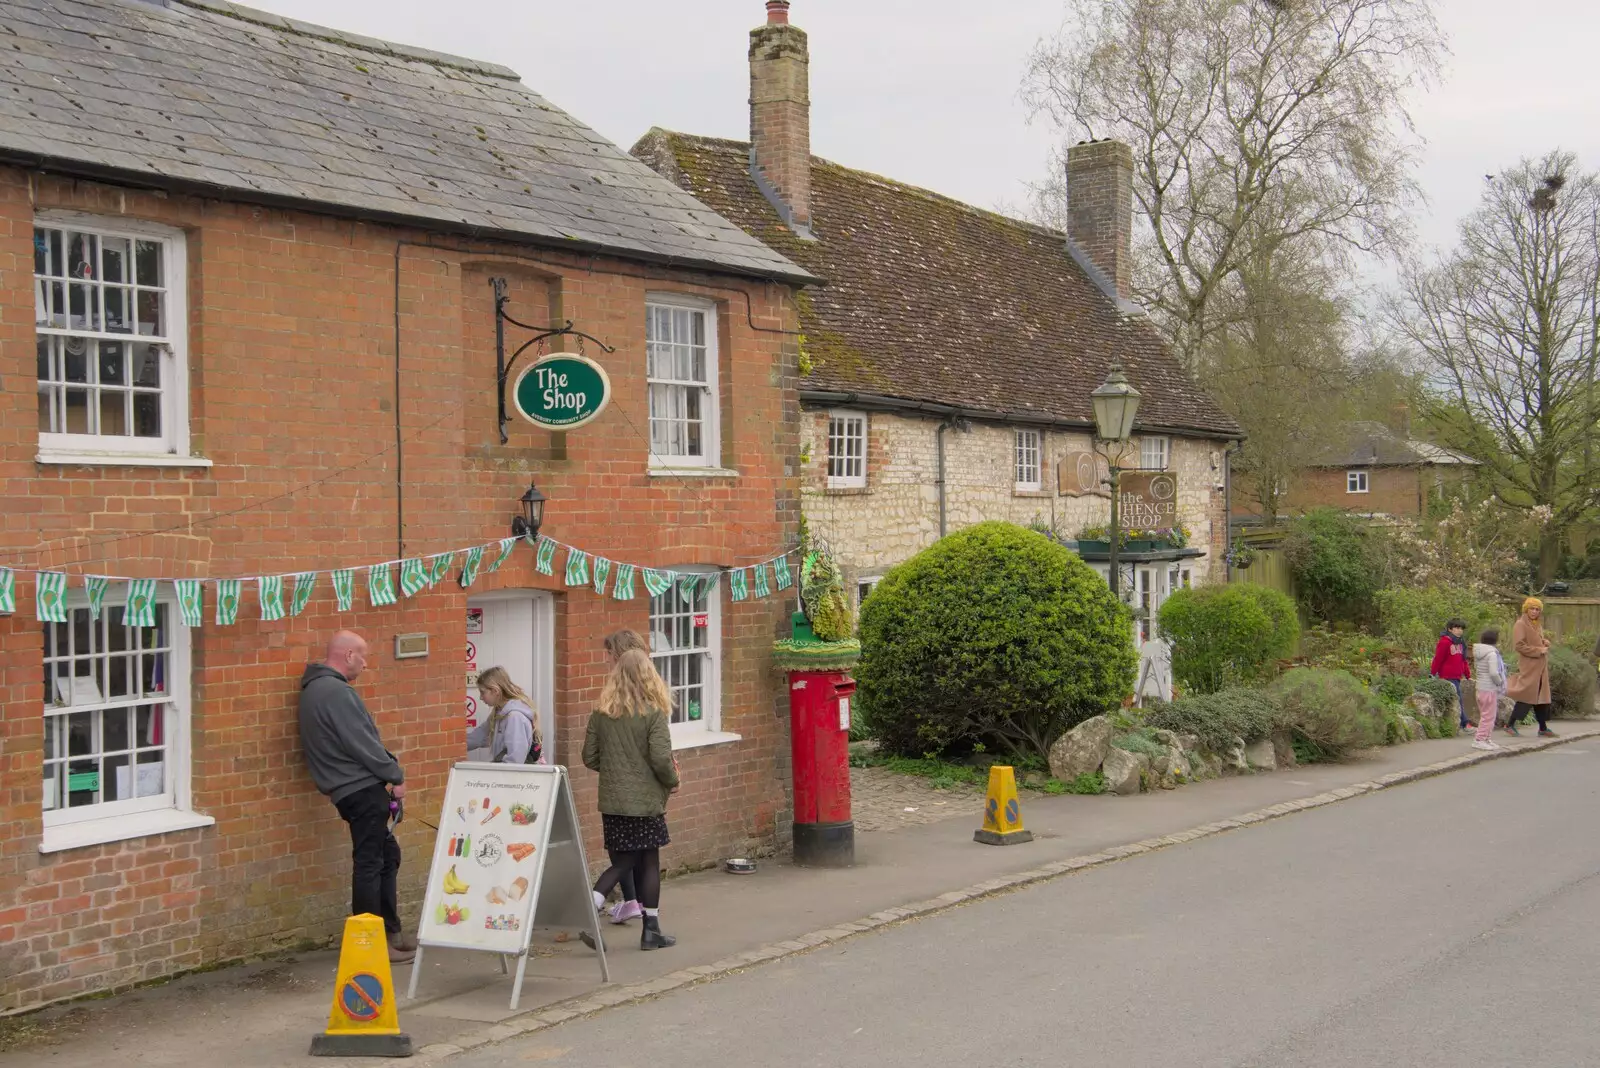 A couple of tourist shops in Avebury, from A Postcard from Marlborough and a Walk on the Herepath, Avebury, Wiltshire - 8th April 2024